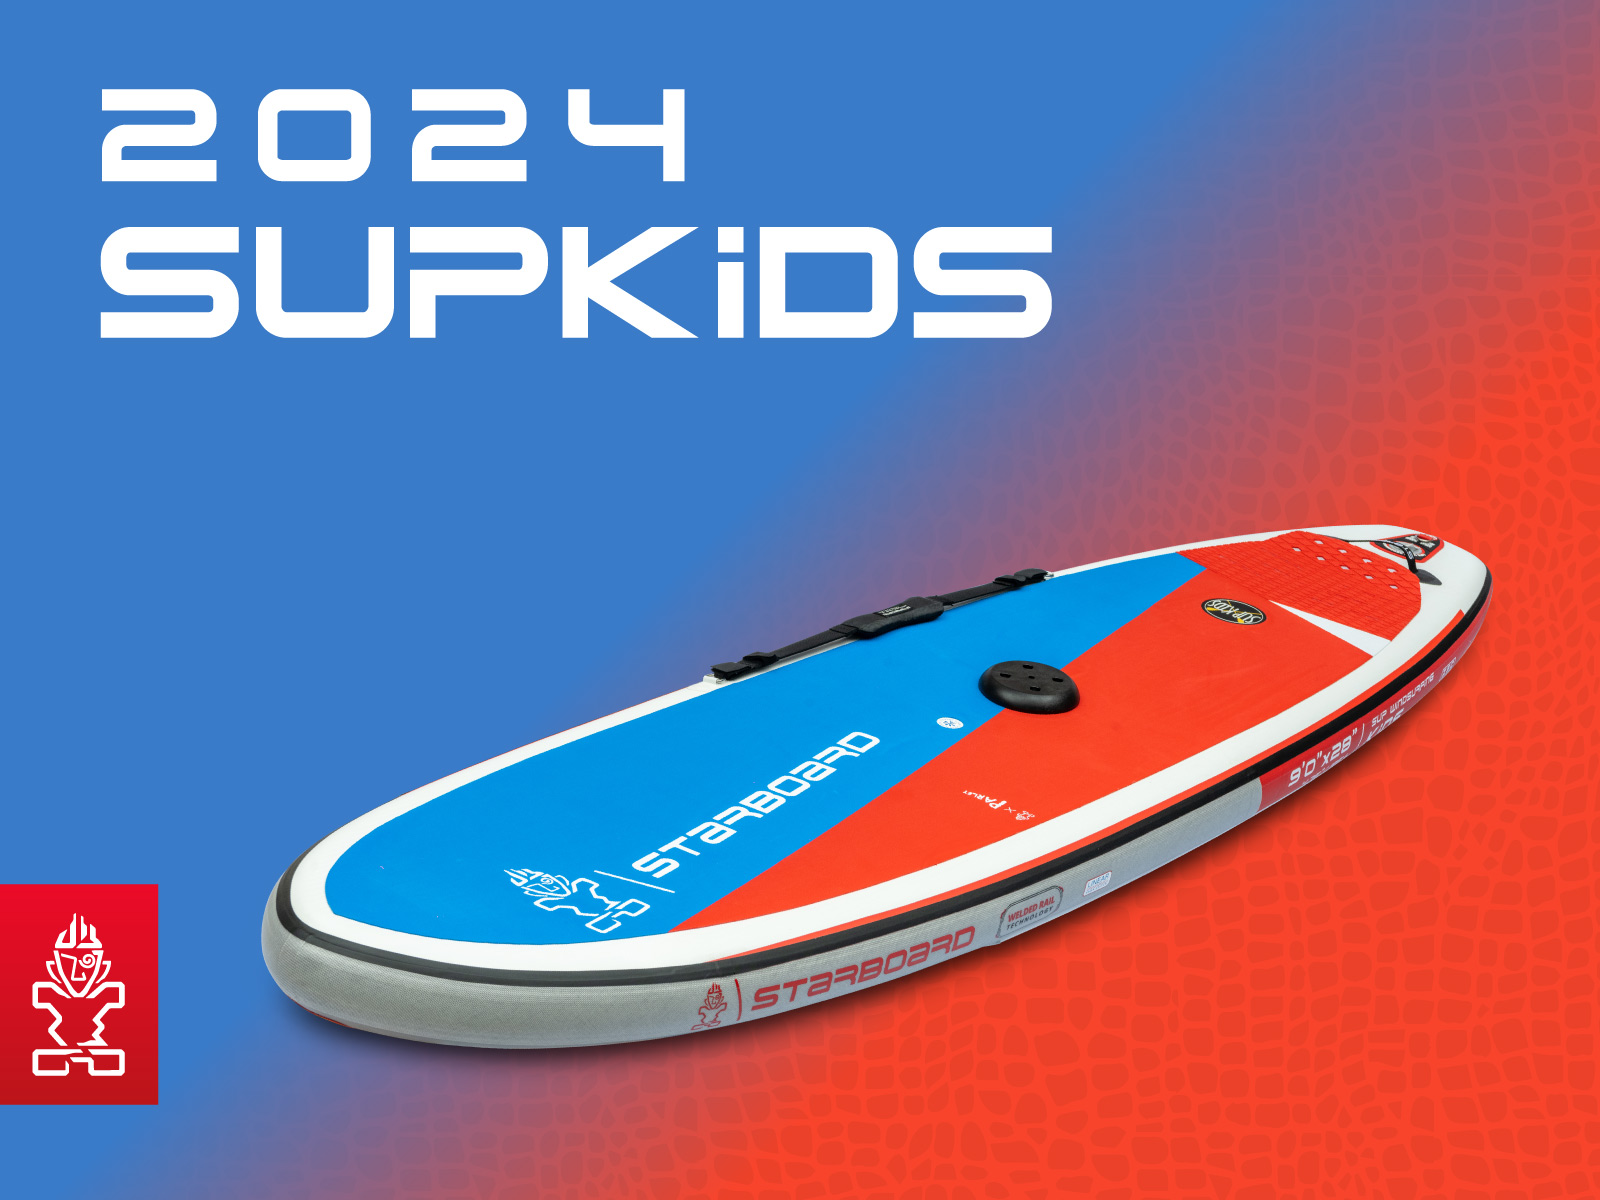 2024 SUPKids Inflatable Paddle Board » Starboard SUP